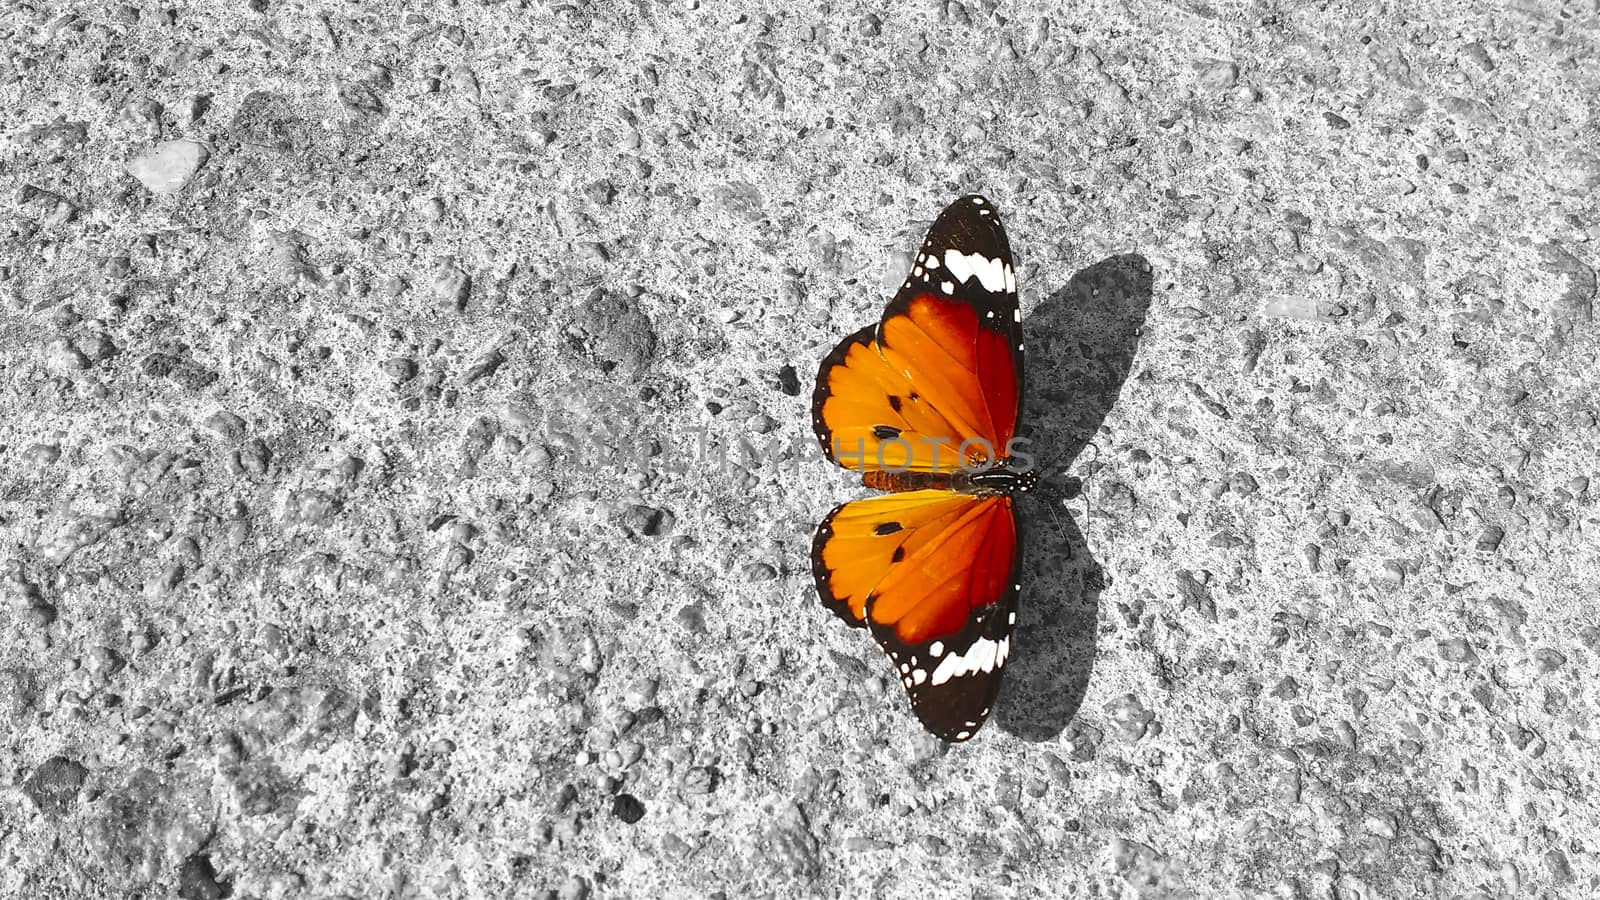 A butterfly Danaus Chrysippus, Plain Tiger, resting on a concrete wall: its beauty and elegance in contrast to the roughness of the raw material